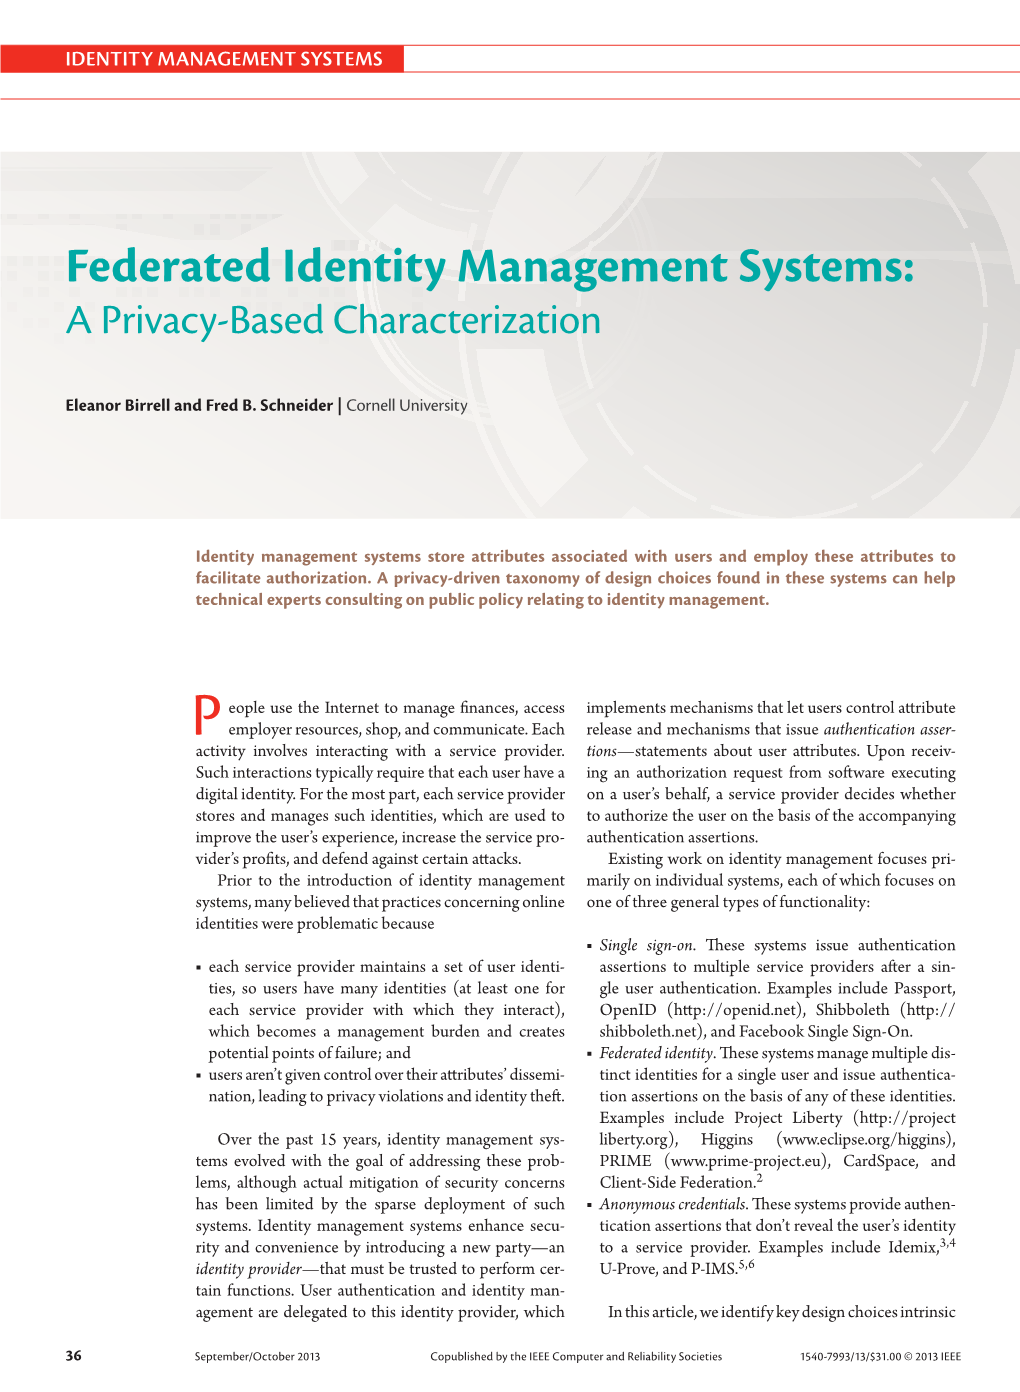 Federated Identity Management Systems: a Privacy-Based Characterization